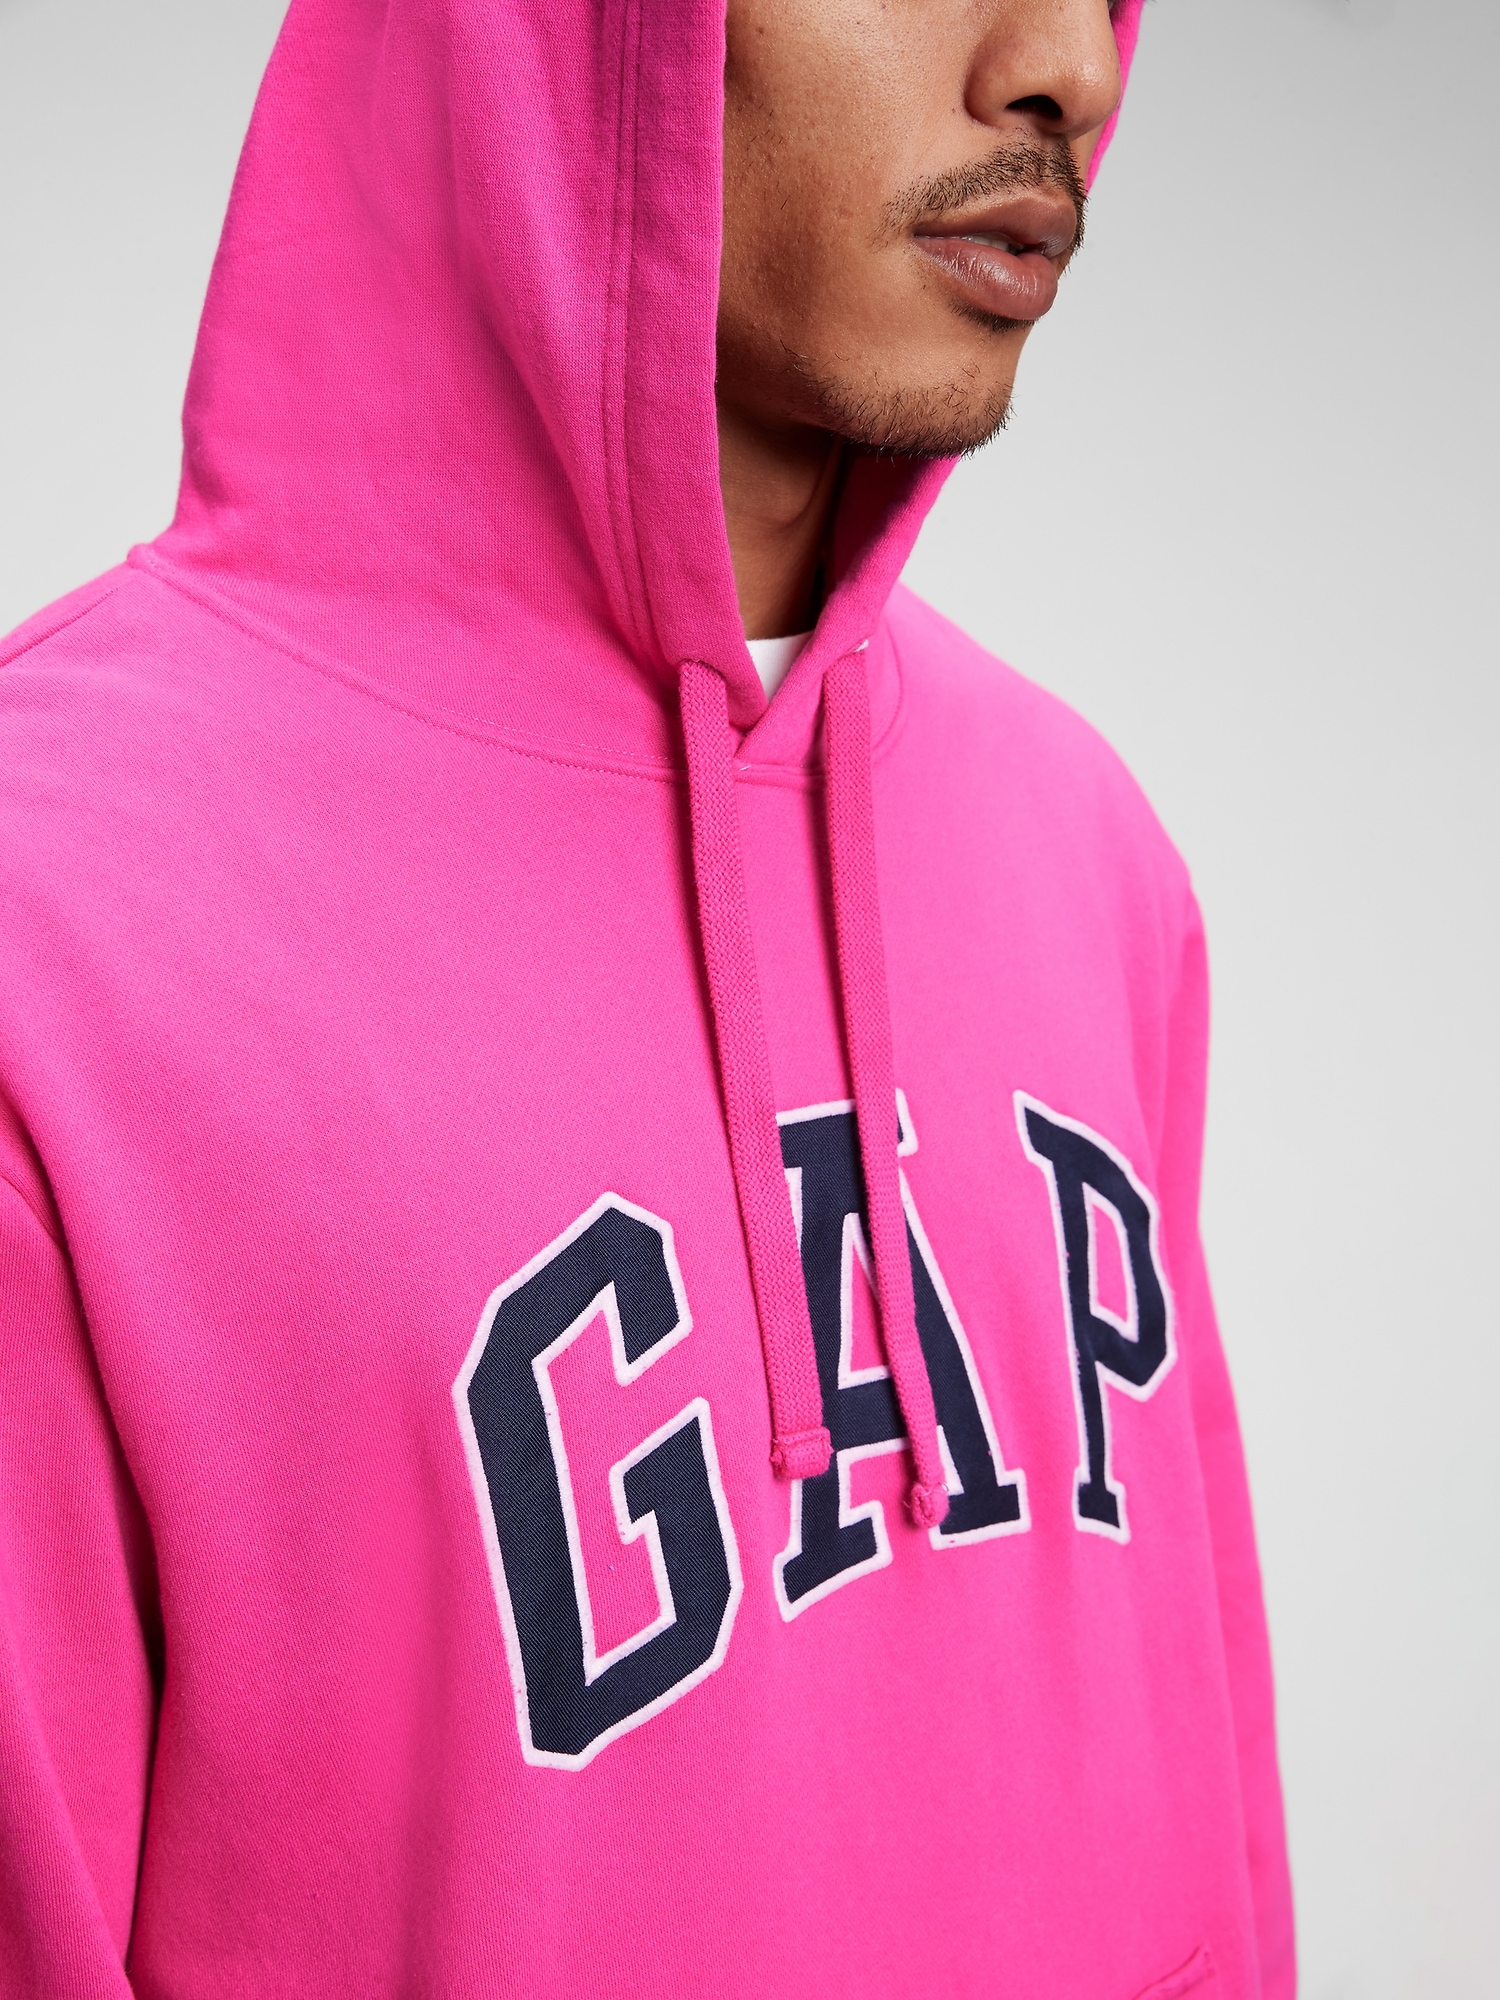 Gap Arch Logo Hoodie In Brown: Shop The Presale Now – StyleCaster